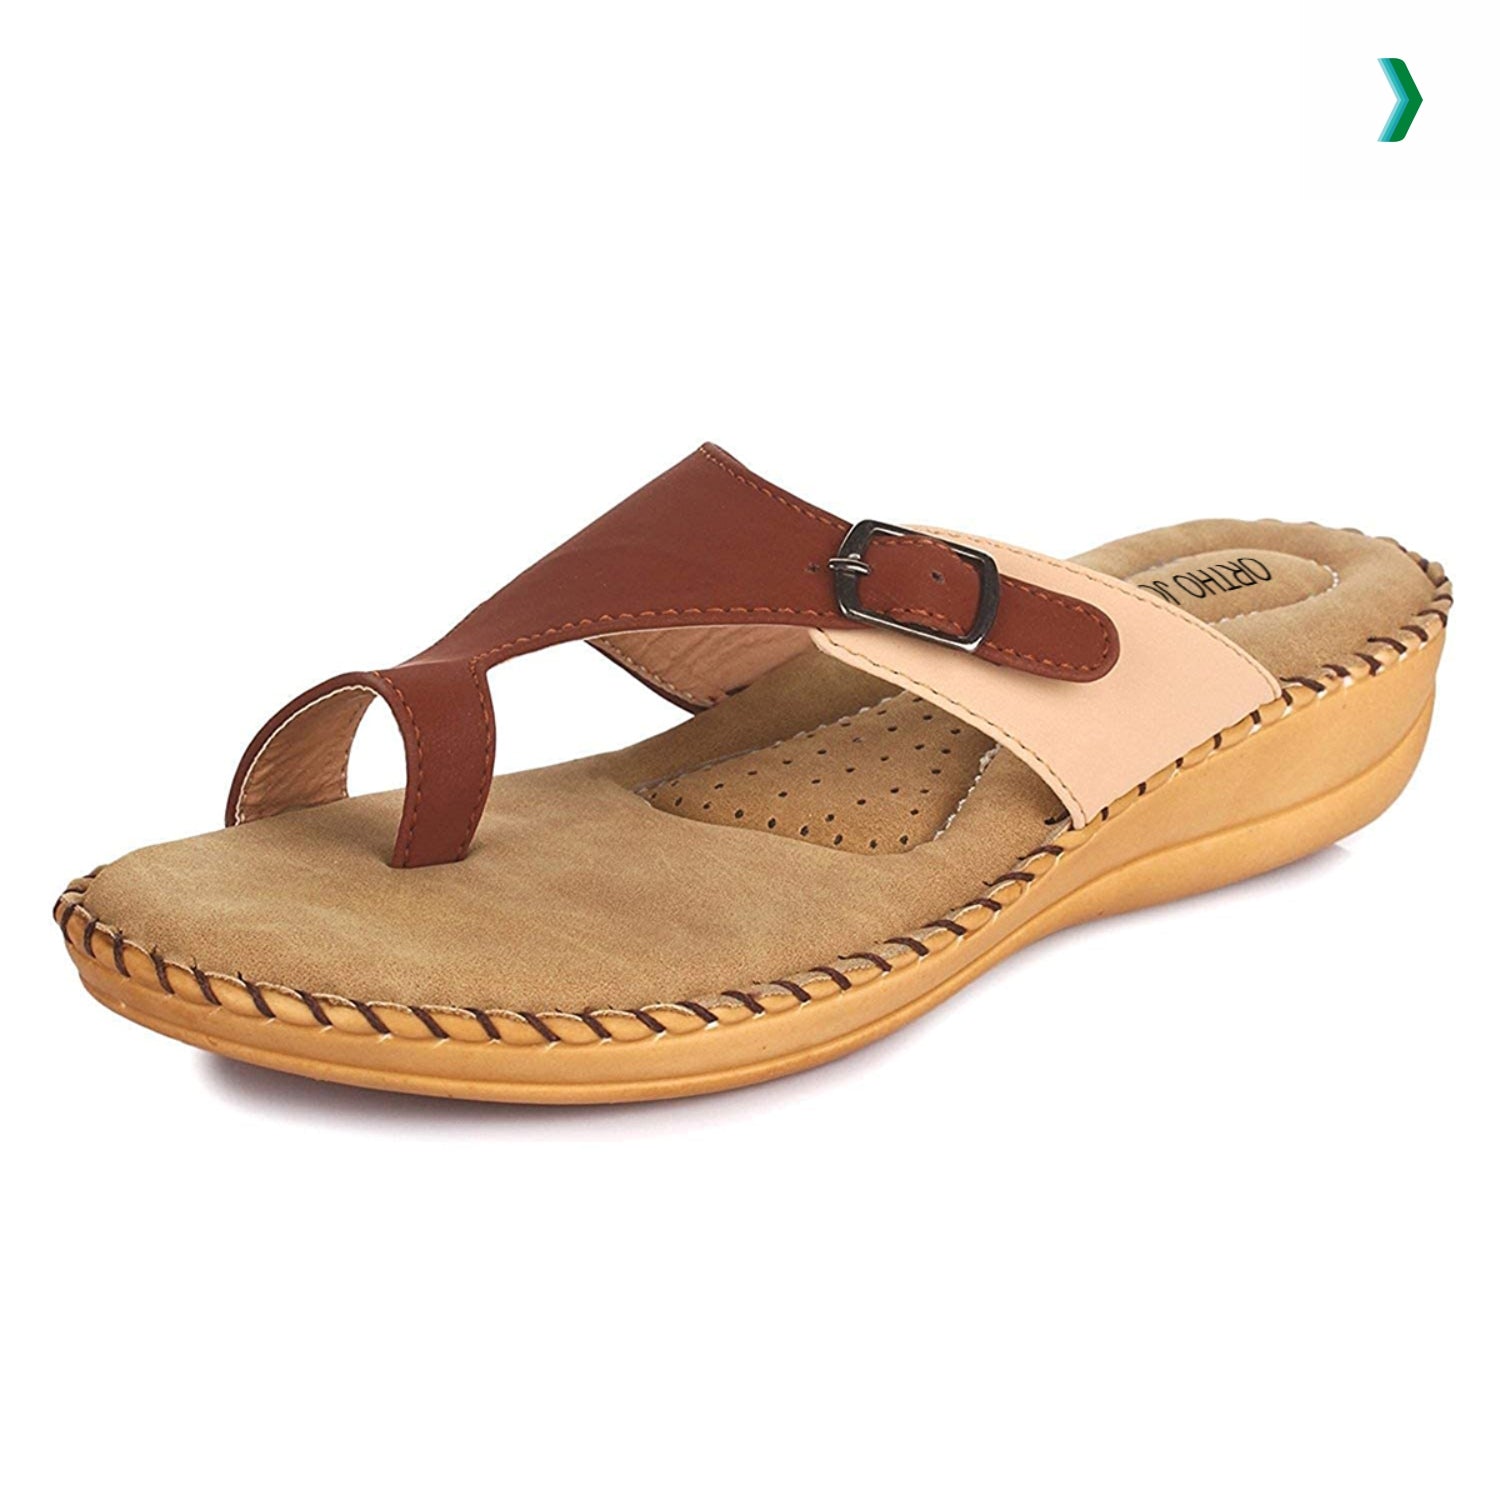 soft doctor chappal for ladies, best ortho slippers, ortho soft slippers